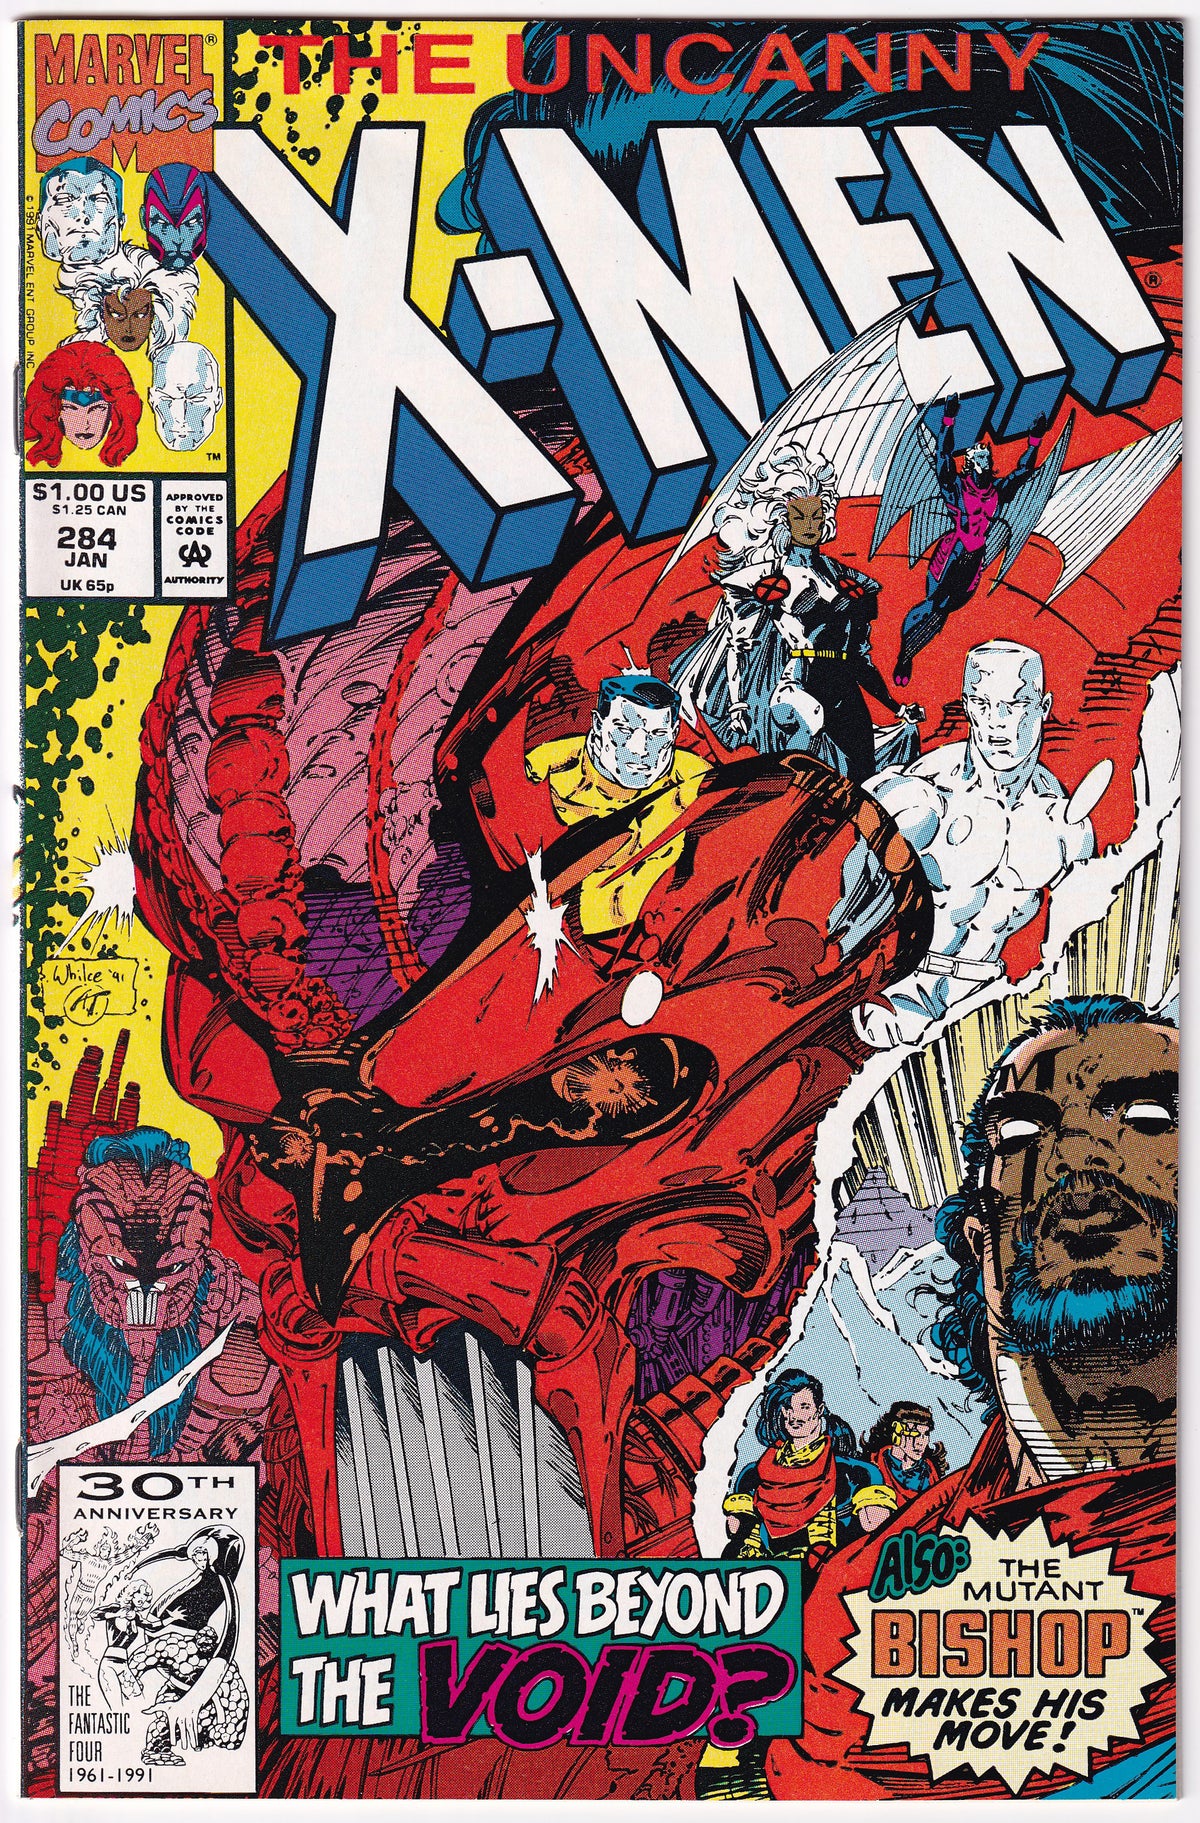 Photo of Uncanny X-Men, Vol. 1 (1992)  Iss 284 Near Mint  Comic sold by Stronghold Collectibles